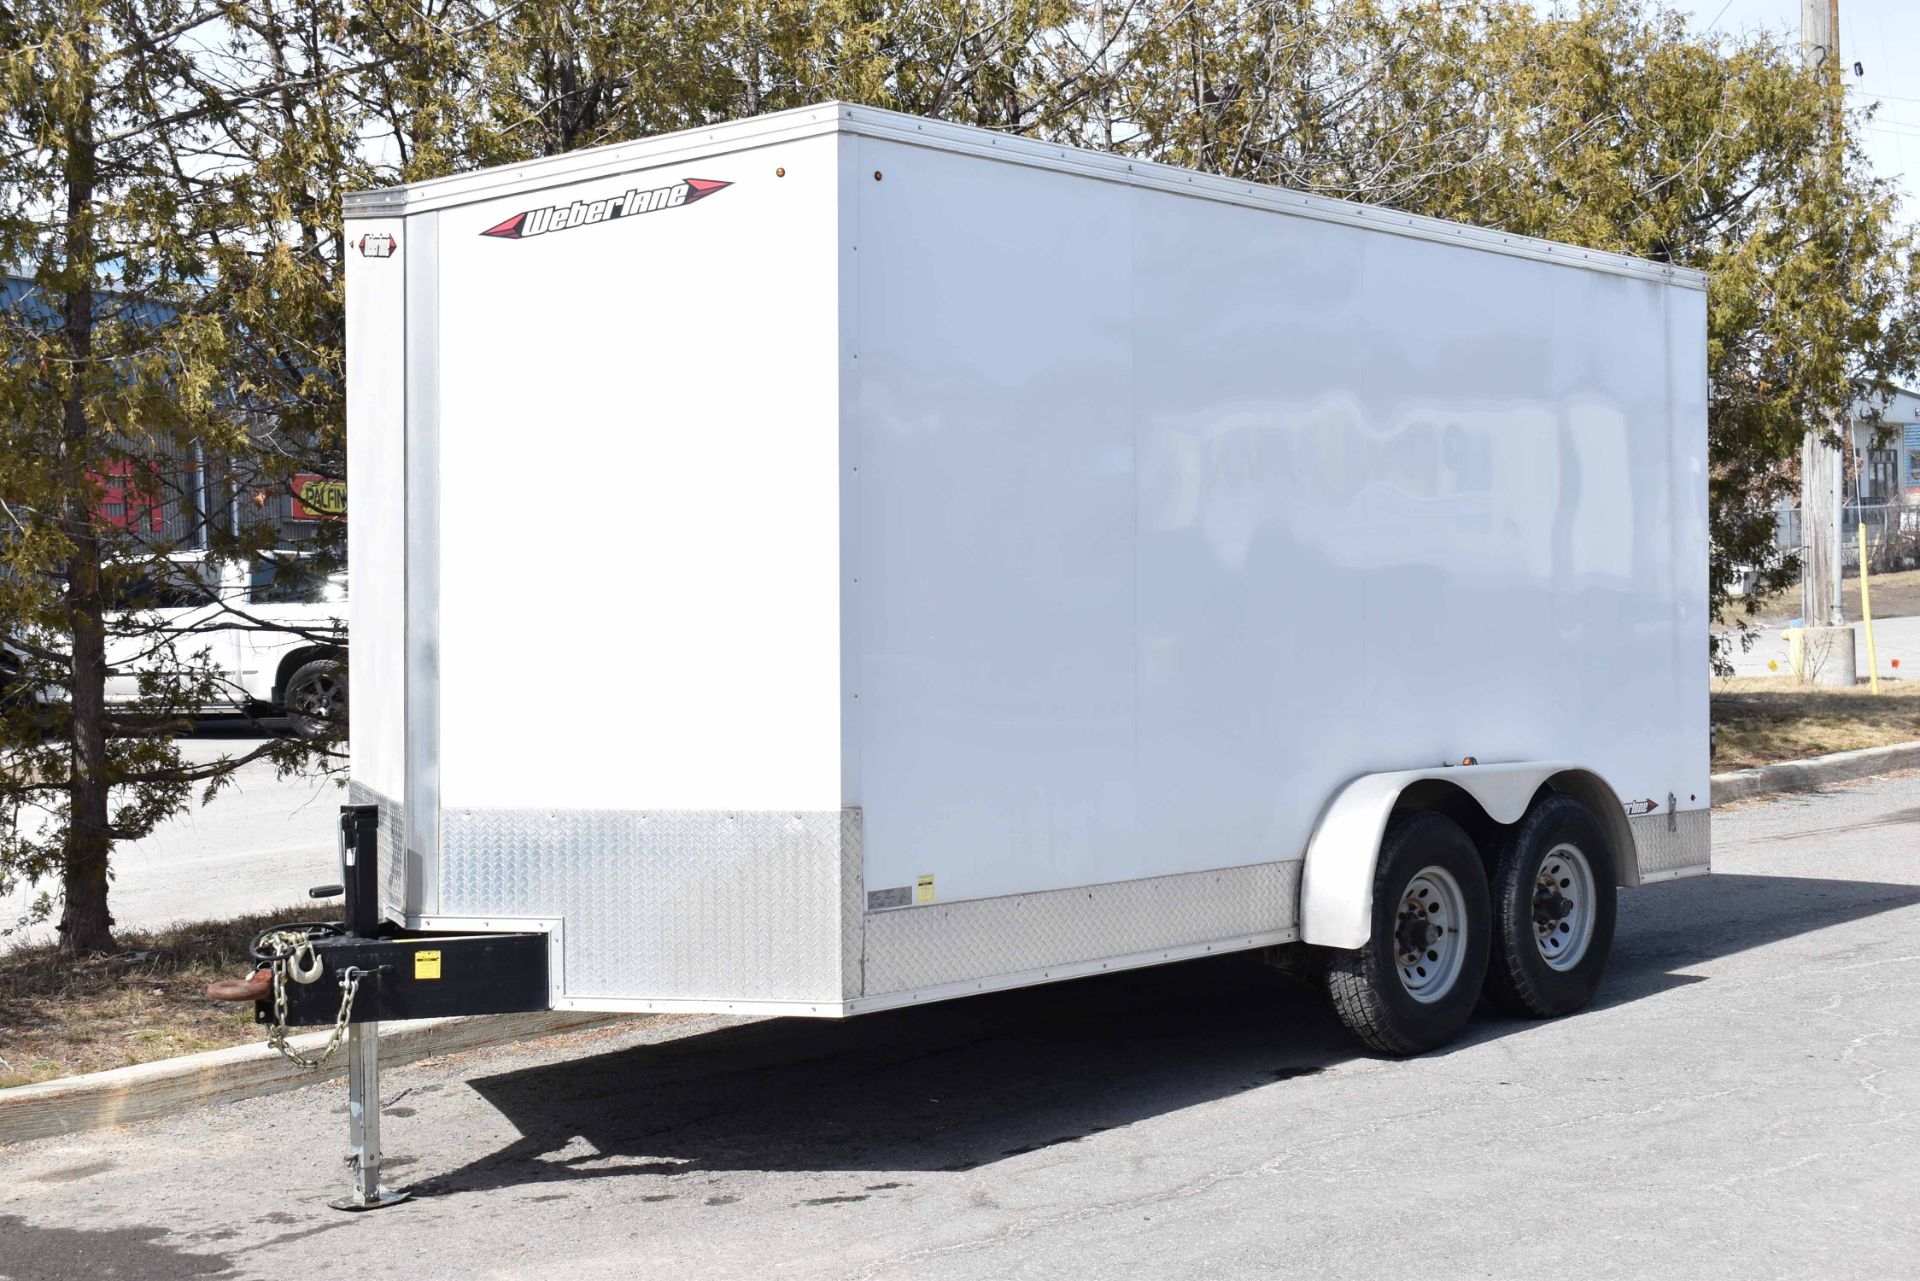 WEBERLANE (2020) W716CCTW TANDEM AXLE ENCLOSED UTILITY TRAILER WITH RAMPS, 15,652 LB GVWR, VIN: